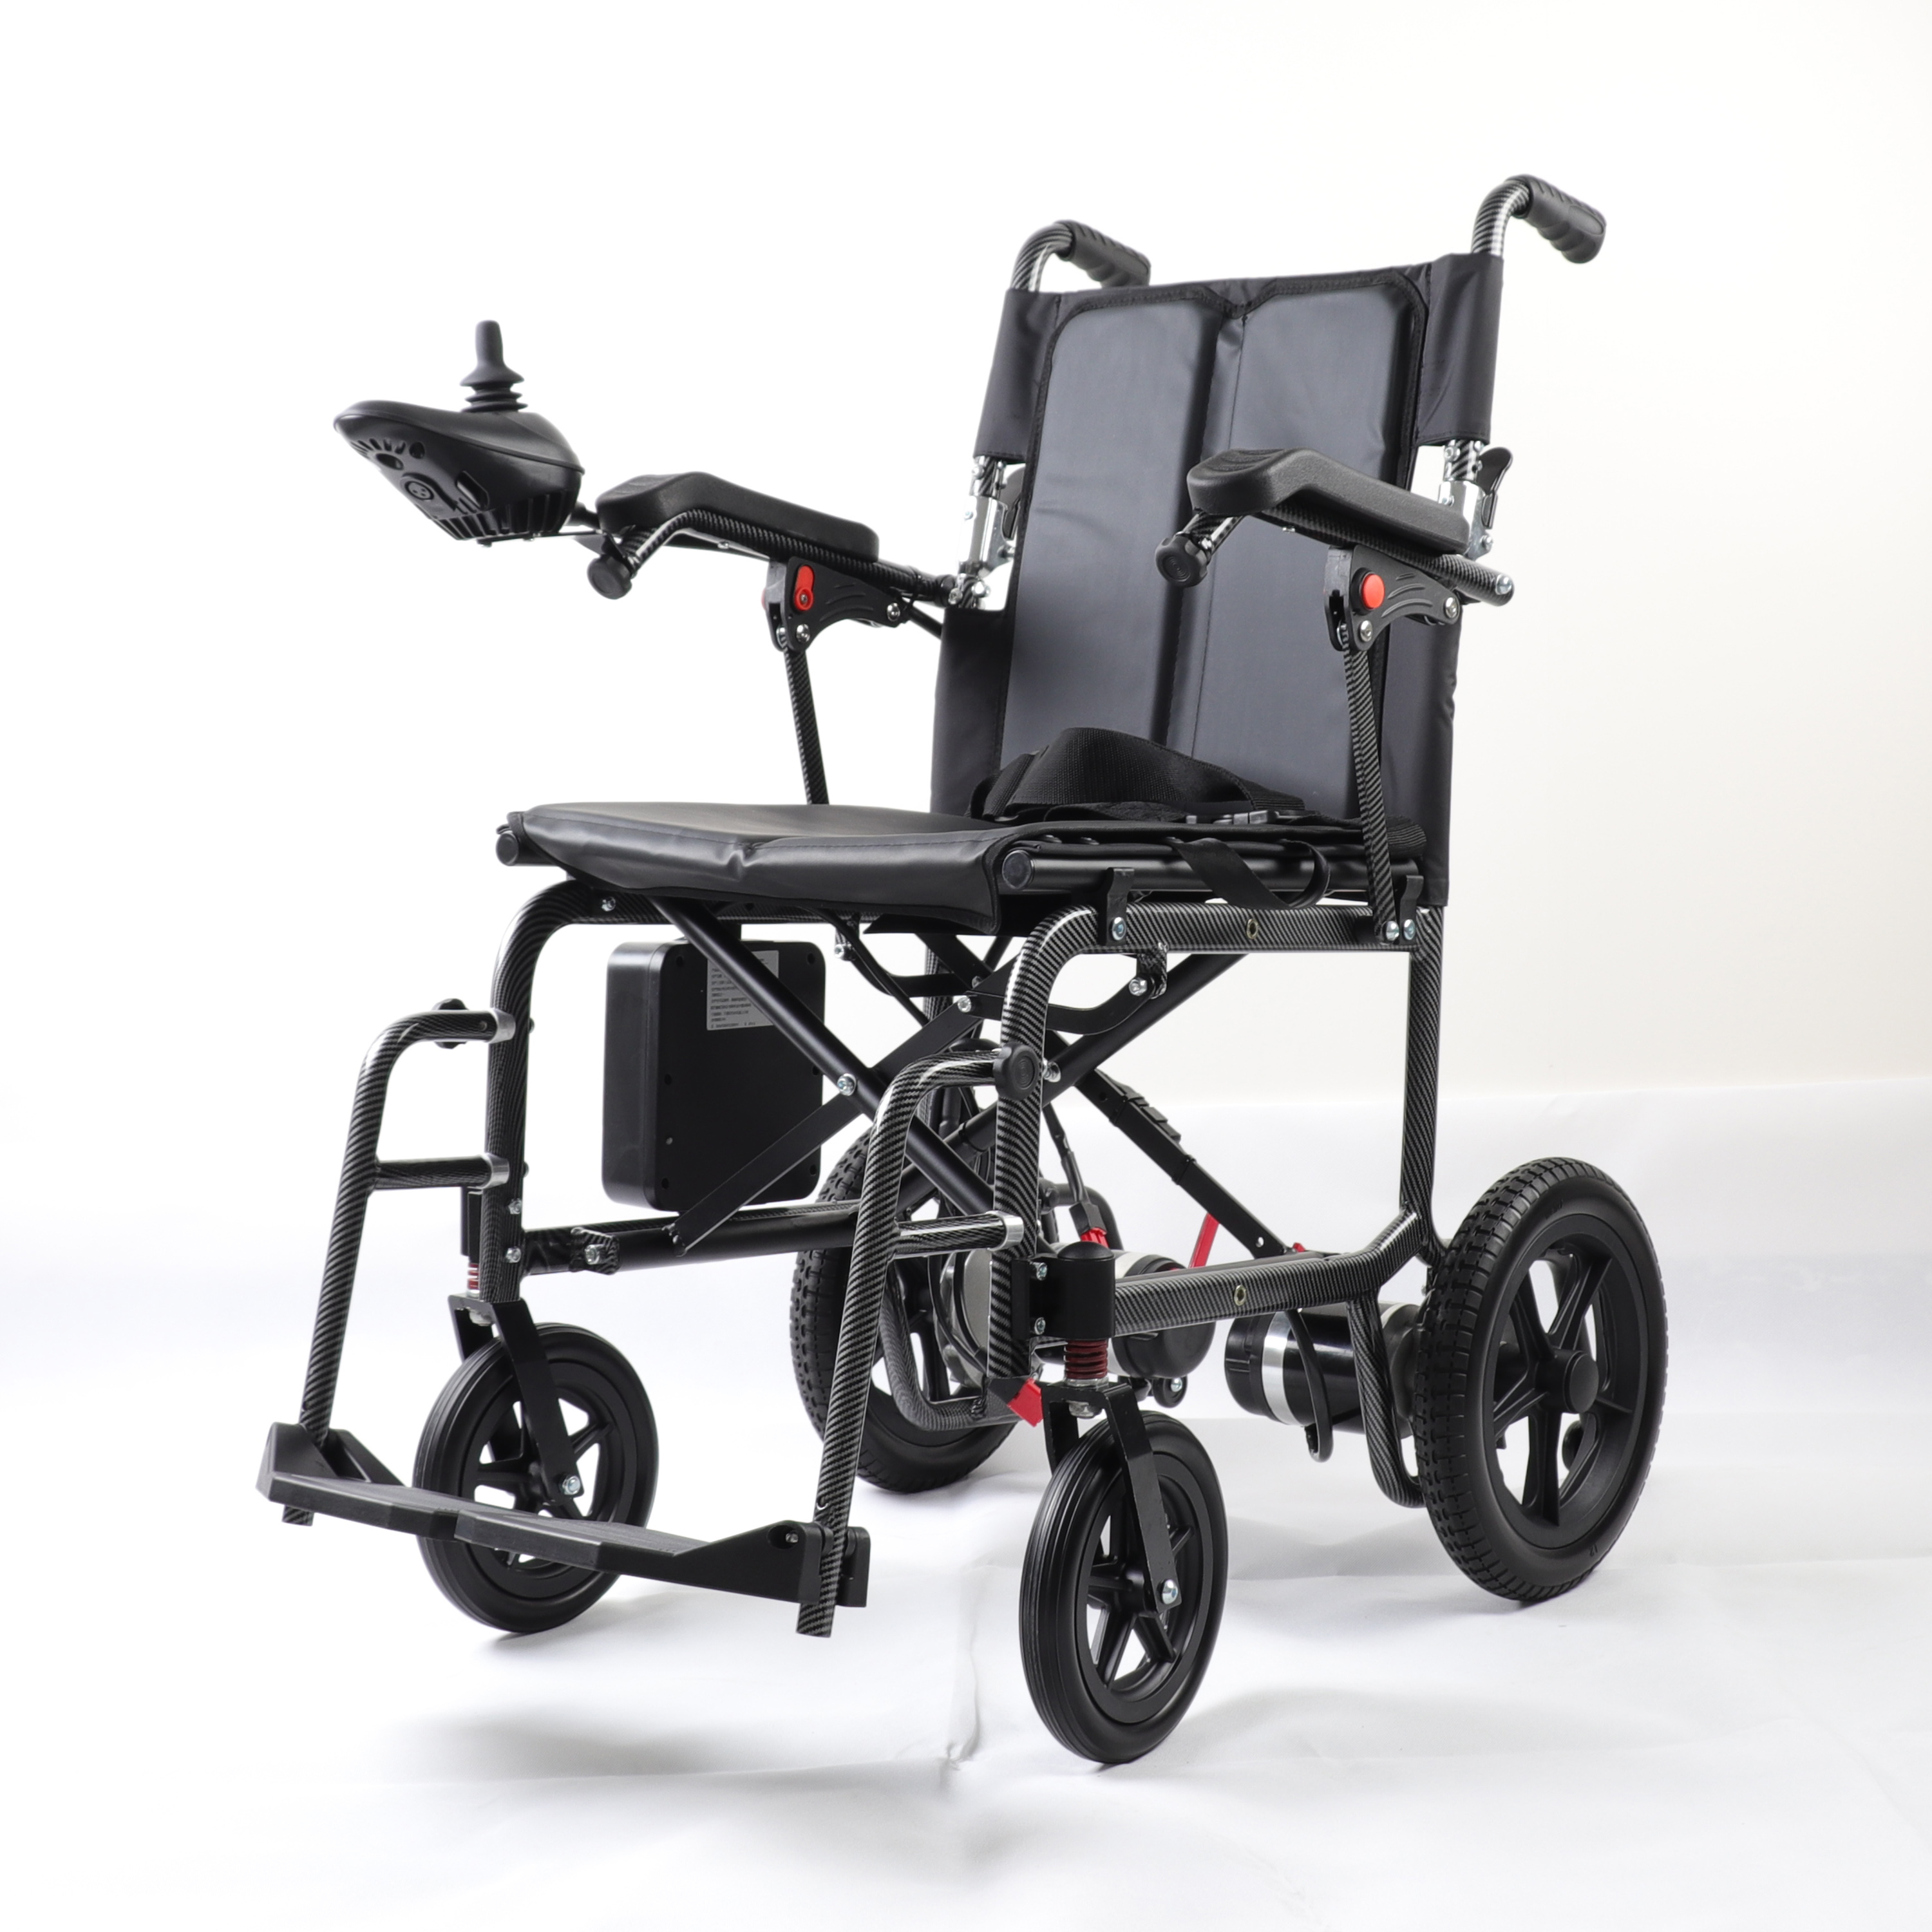 How to choose a suitable electric wheelchair for different weights and physical conditions?